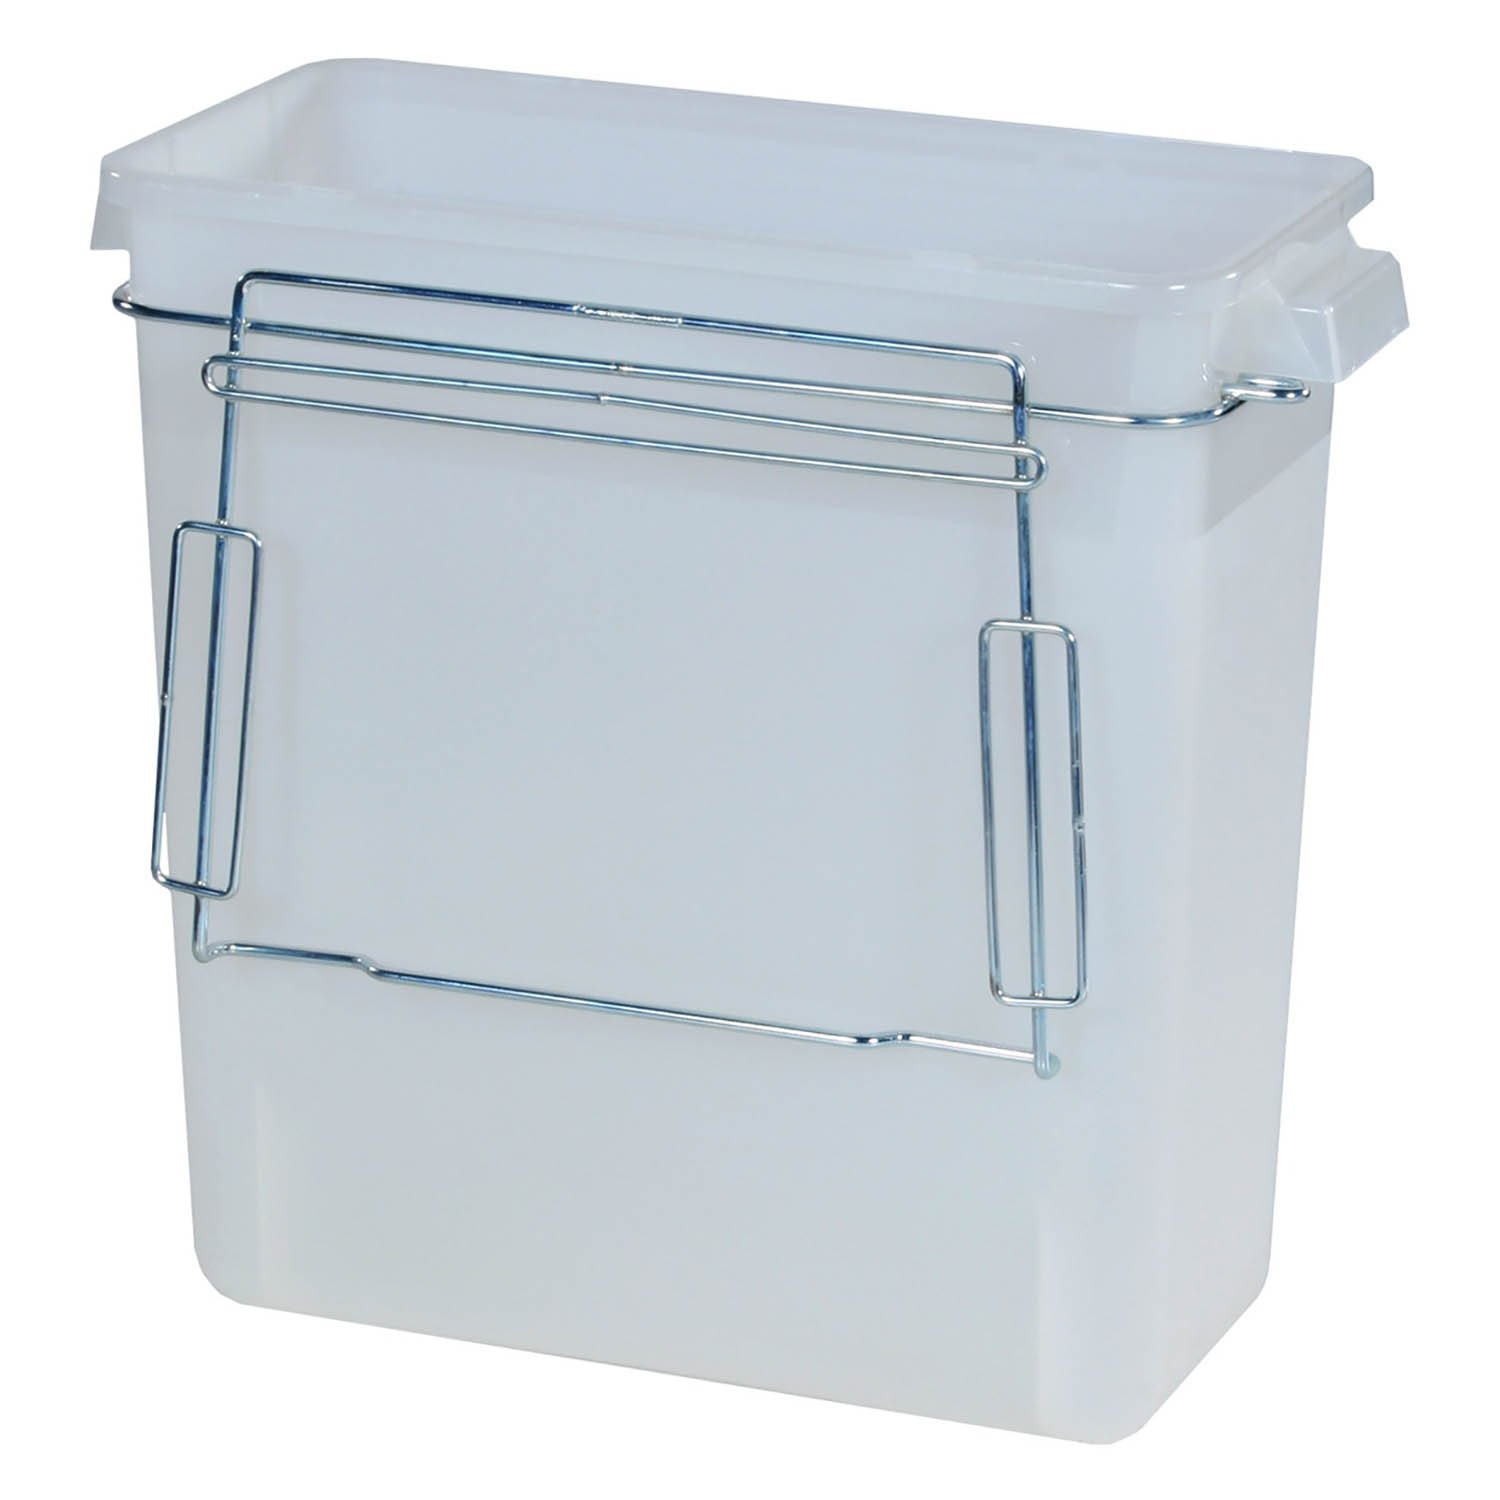 https://www.universalmedicalinc.com/media/catalog/product/cache/396fa530d5fa12bef36f4c19de24af0a/6/8/684801_three-gallon-plastic-waste-container-mounting-bracket-without-cover_2.jpg